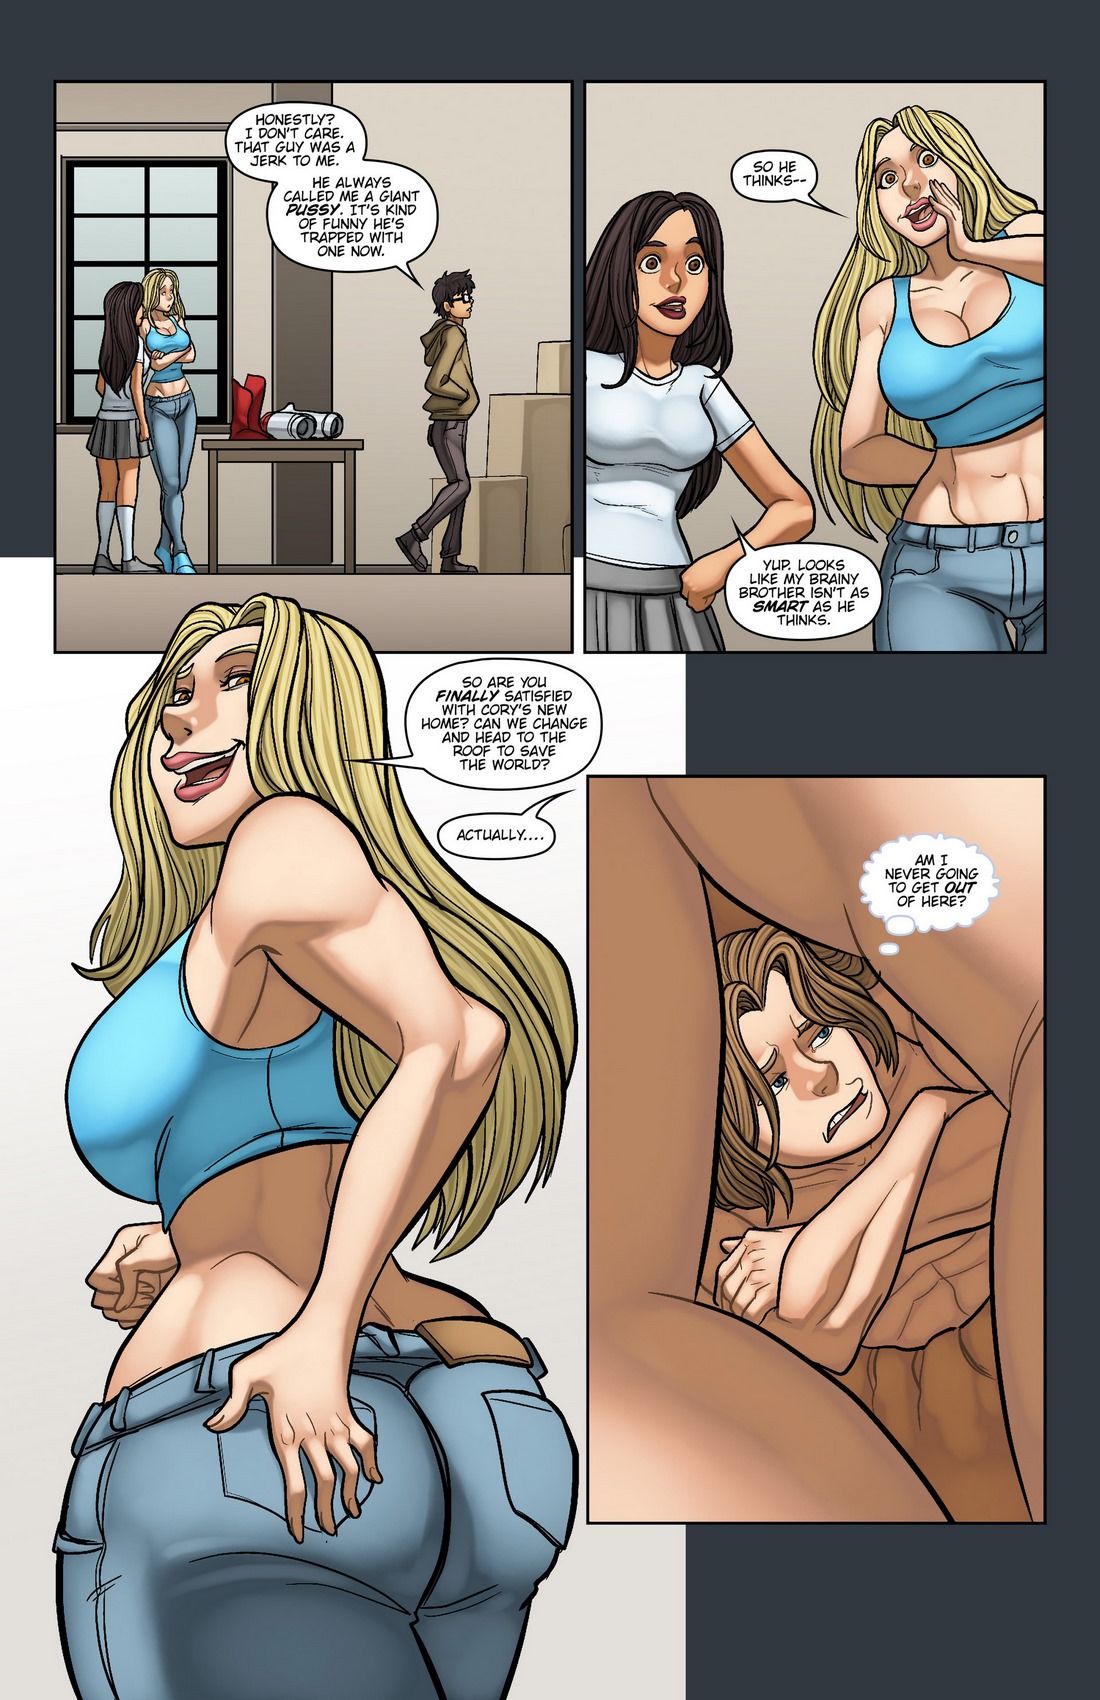 Portals Issue 6 Size Fight (GiantessFan) page 4